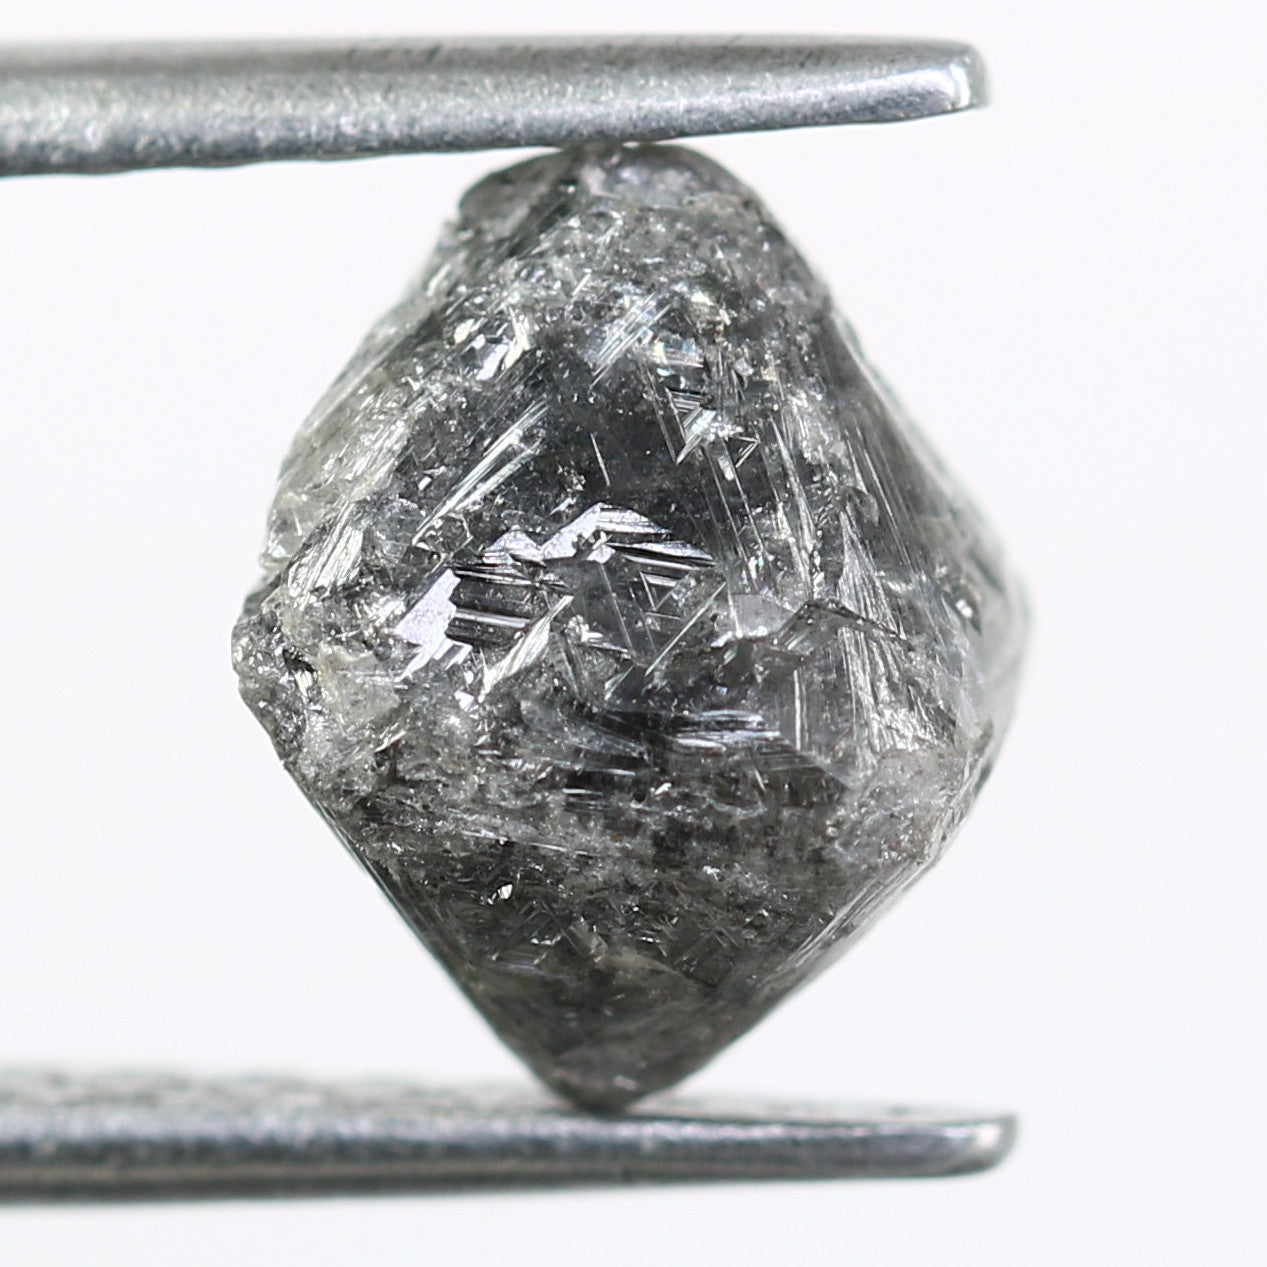 2.77 CT Salt And Pepper Raw Uncut Rough Diamond For Engagement ...